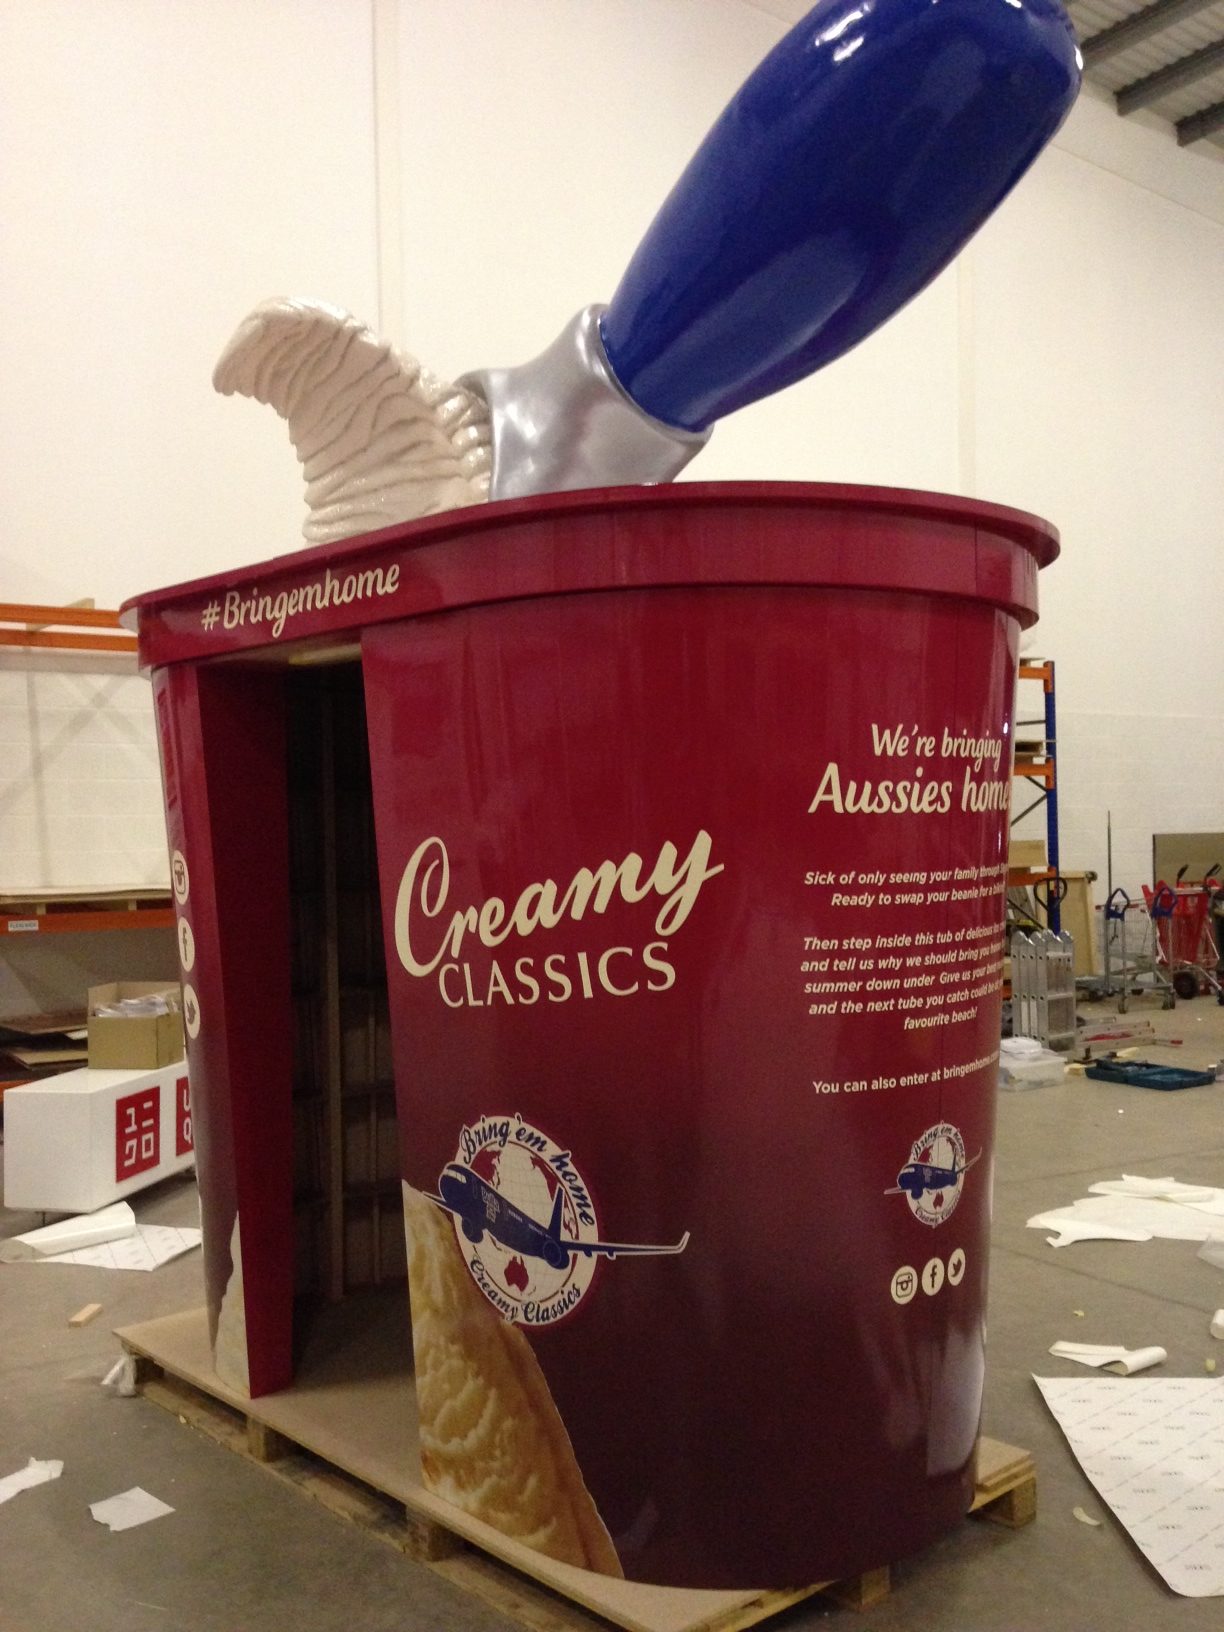 A large sculpture of a tub of ice cream in a red tub